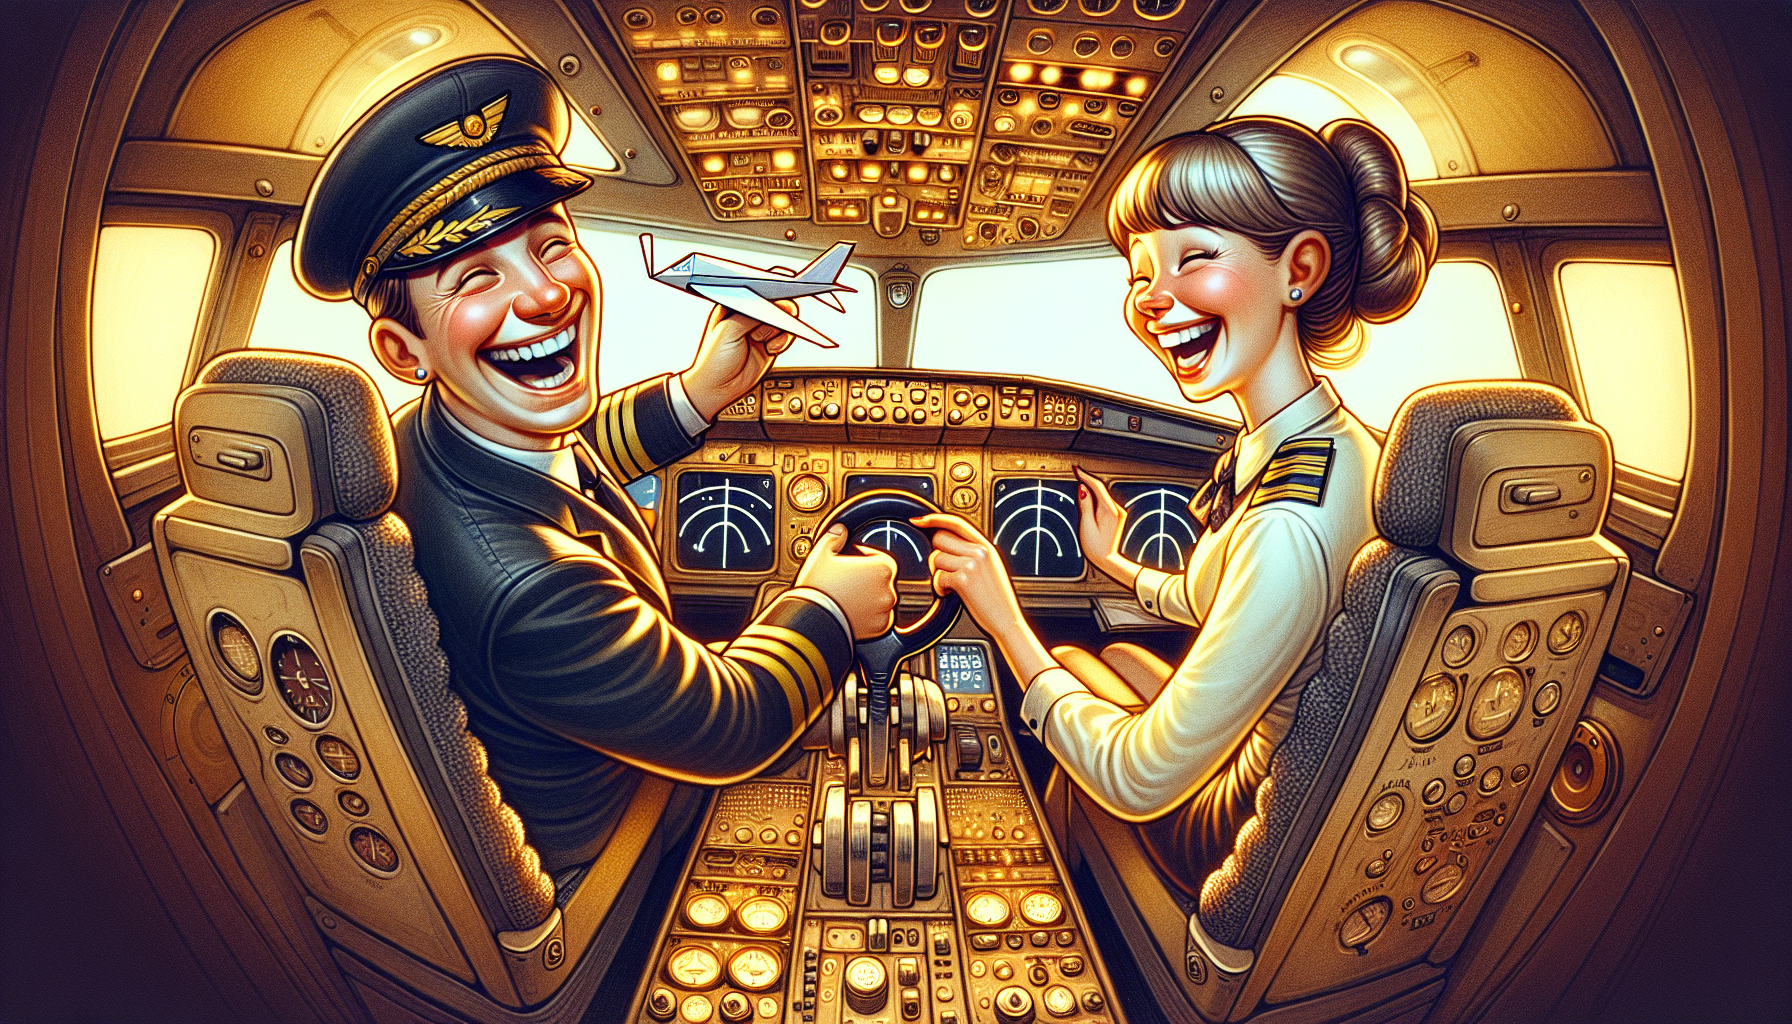 A humorous illustration of a pilot and a flight attendant exchanging funny puns in the cockpit